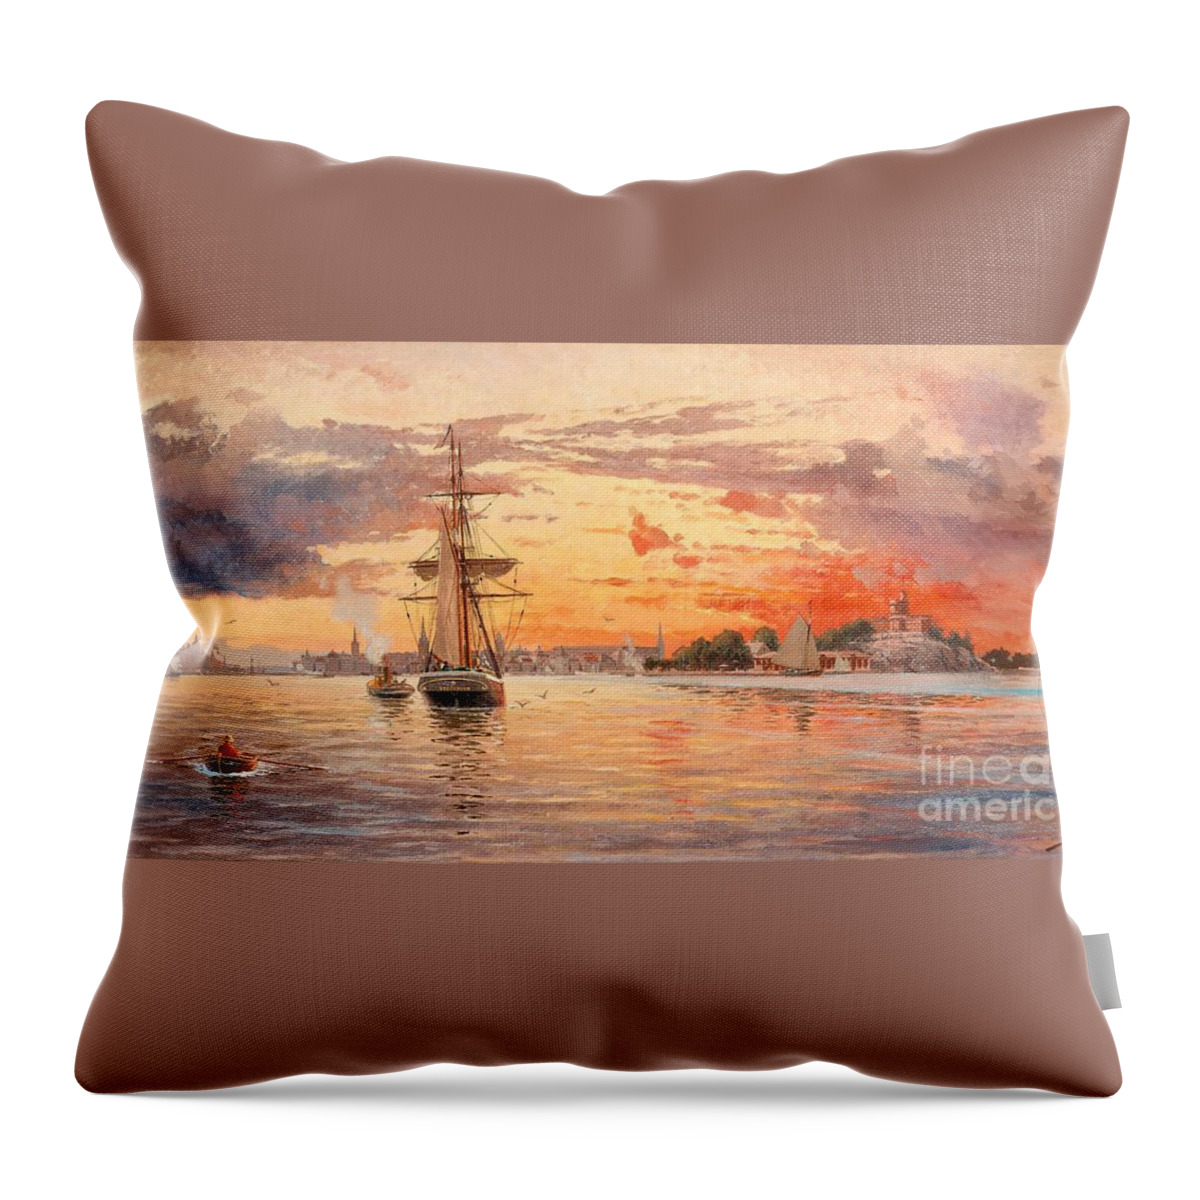 Jacob Hgg Throw Pillow featuring the painting Sun Setting Over The Sea Approach To Stockholm by MotionAge Designs